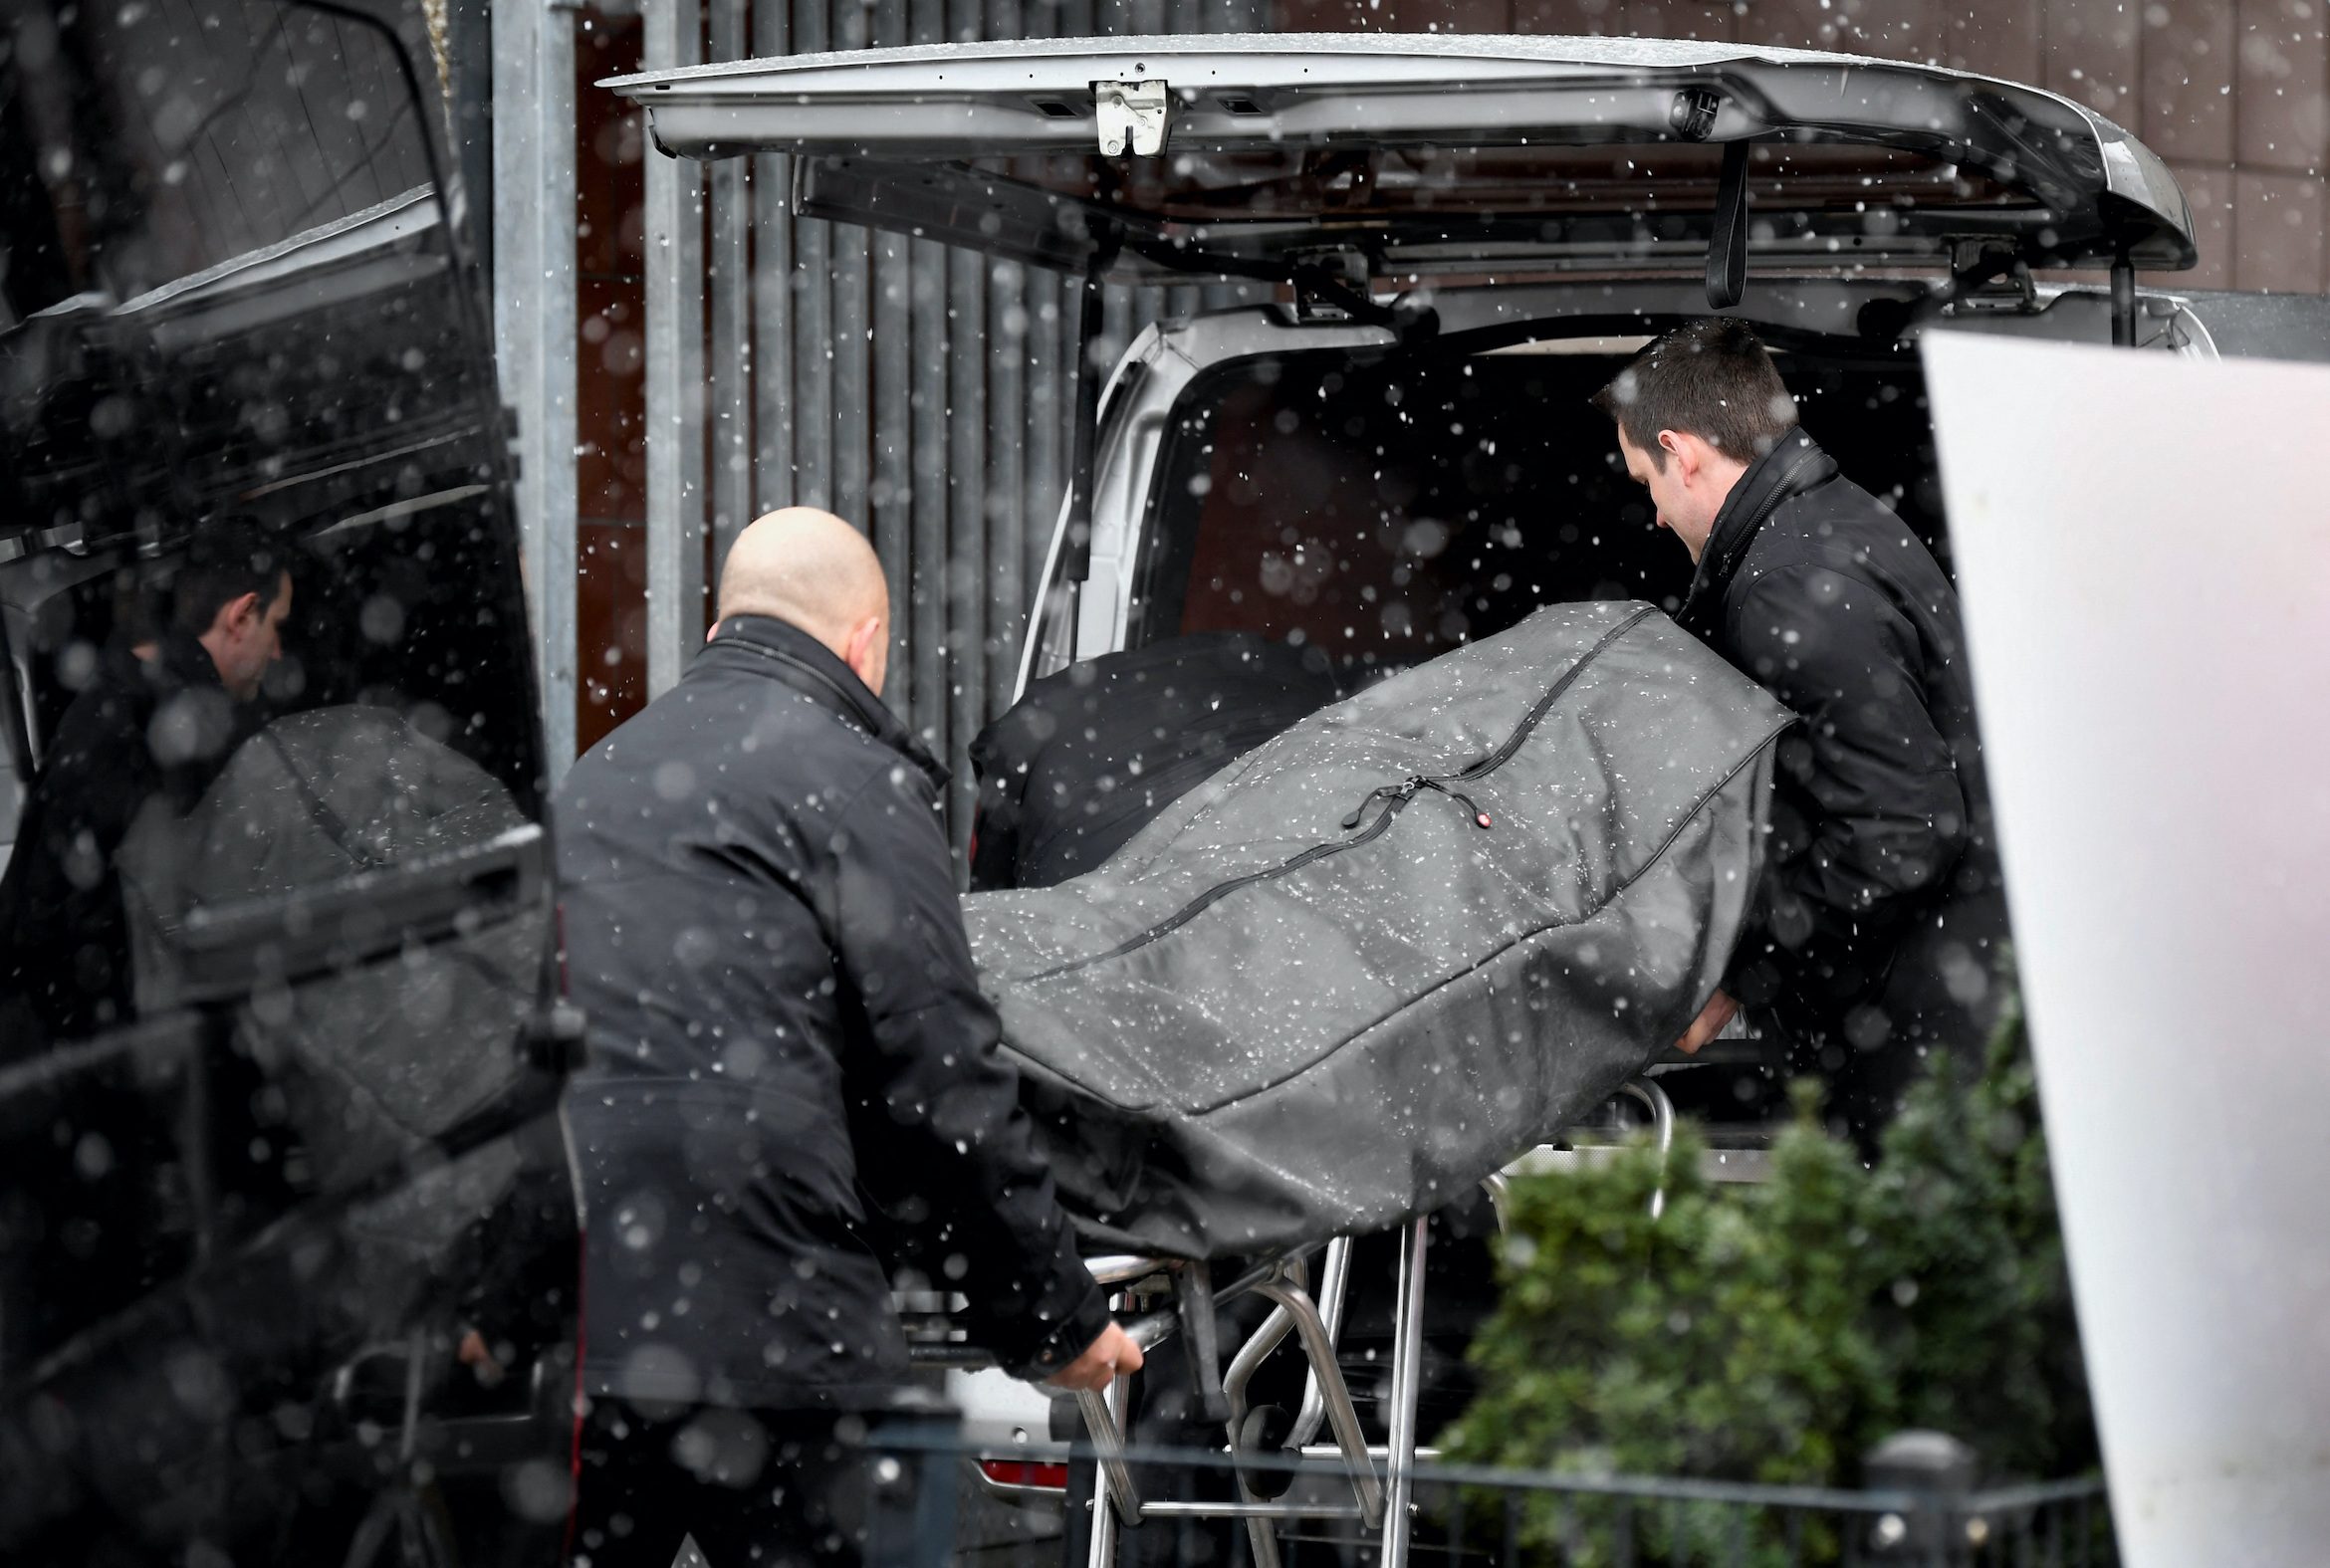 8 killed, including gunman, at Jehovah’s Witness hall shooting in Germany